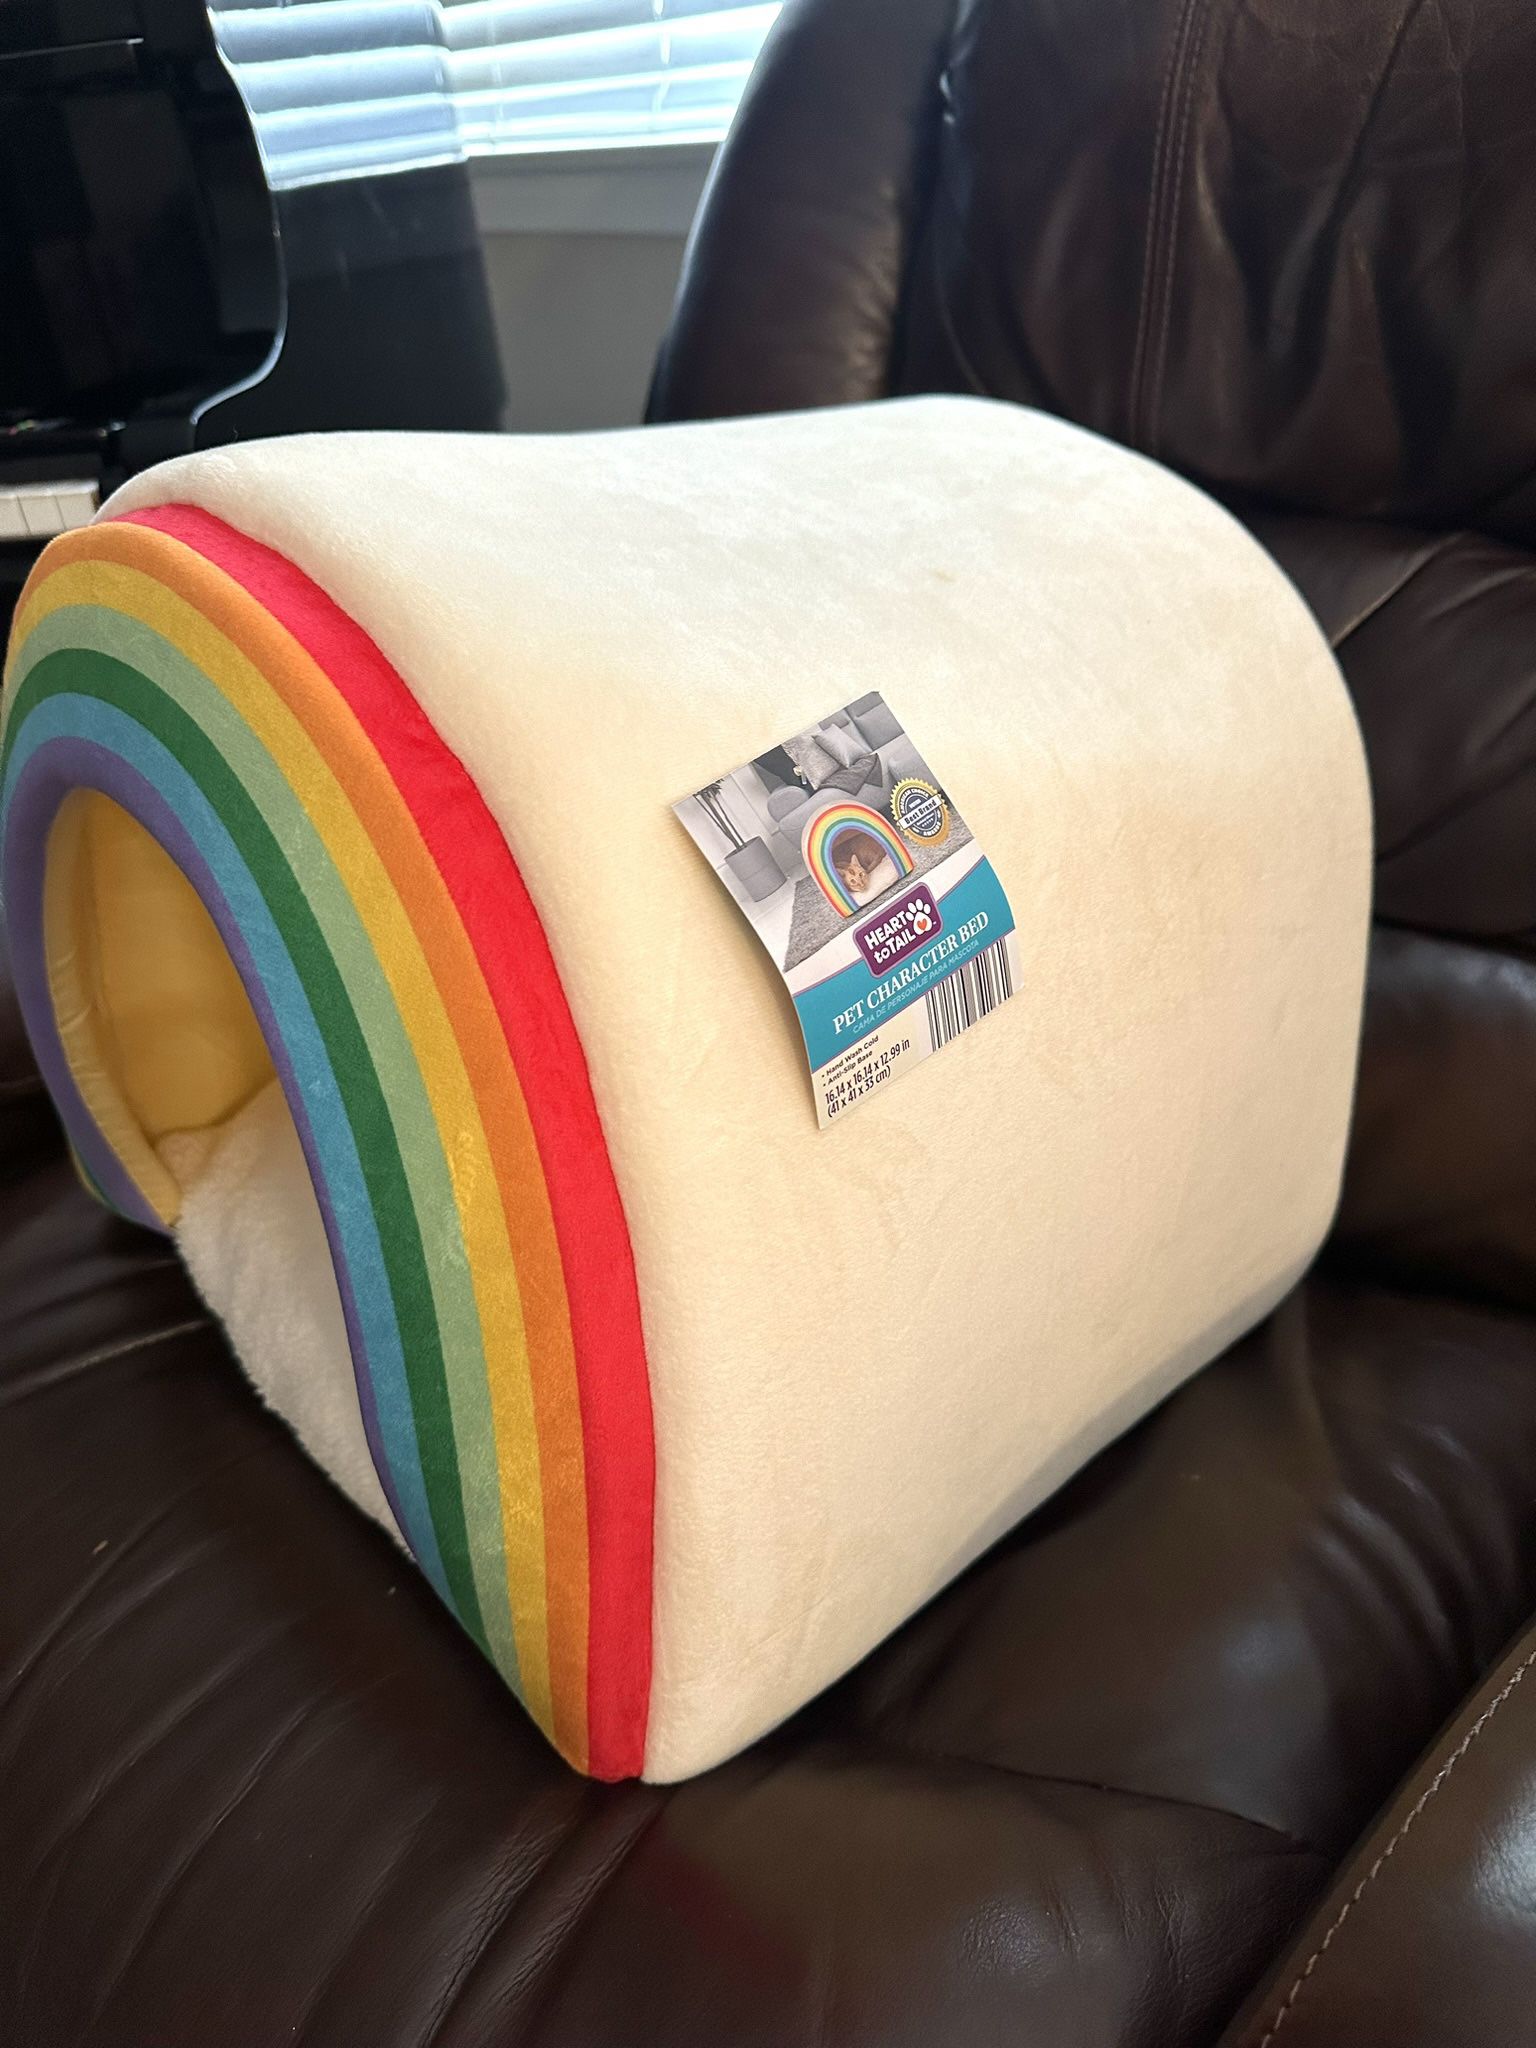 Covered Pet Bed